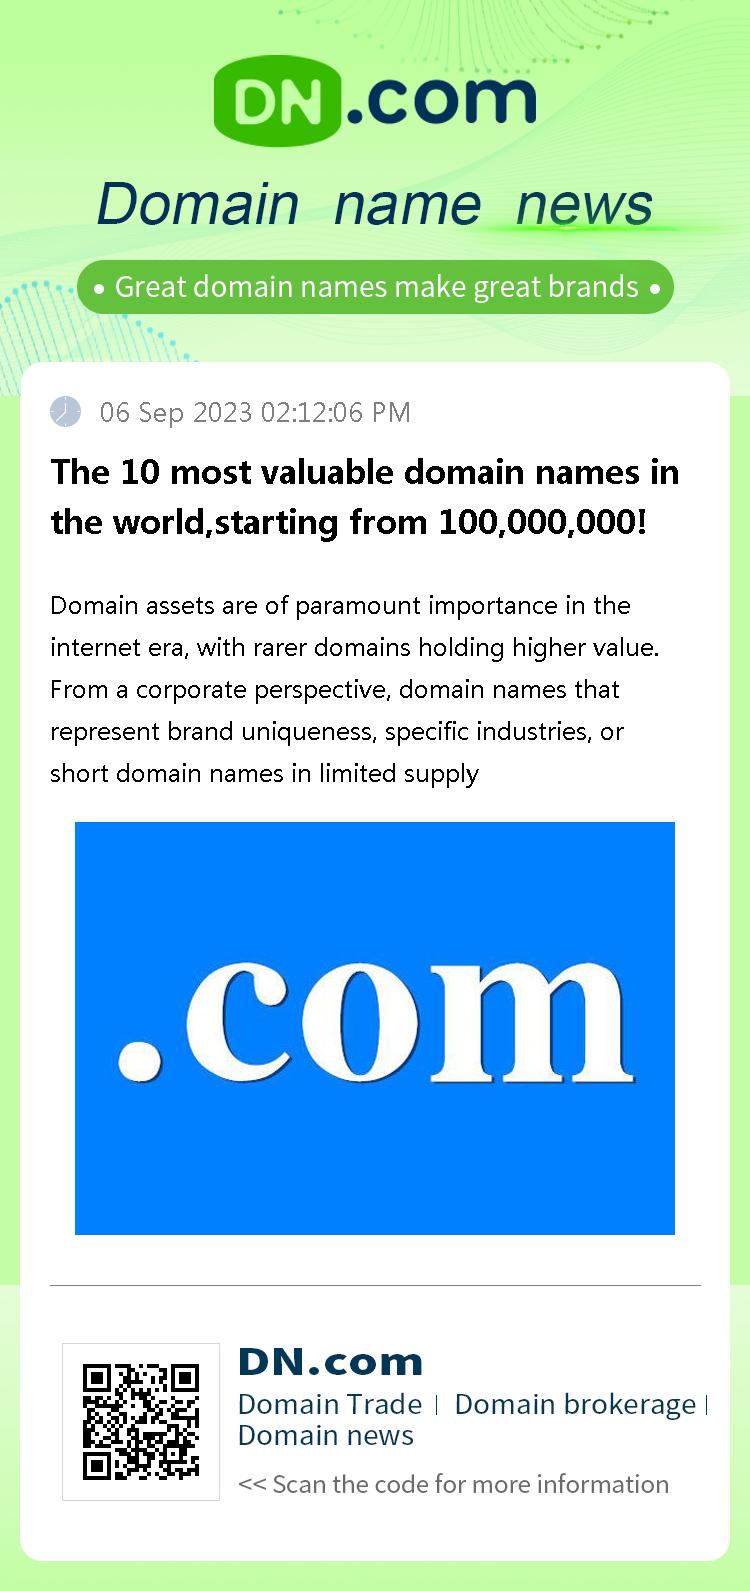 The 10 most valuable domain names in the world,starting from 100,000,000!